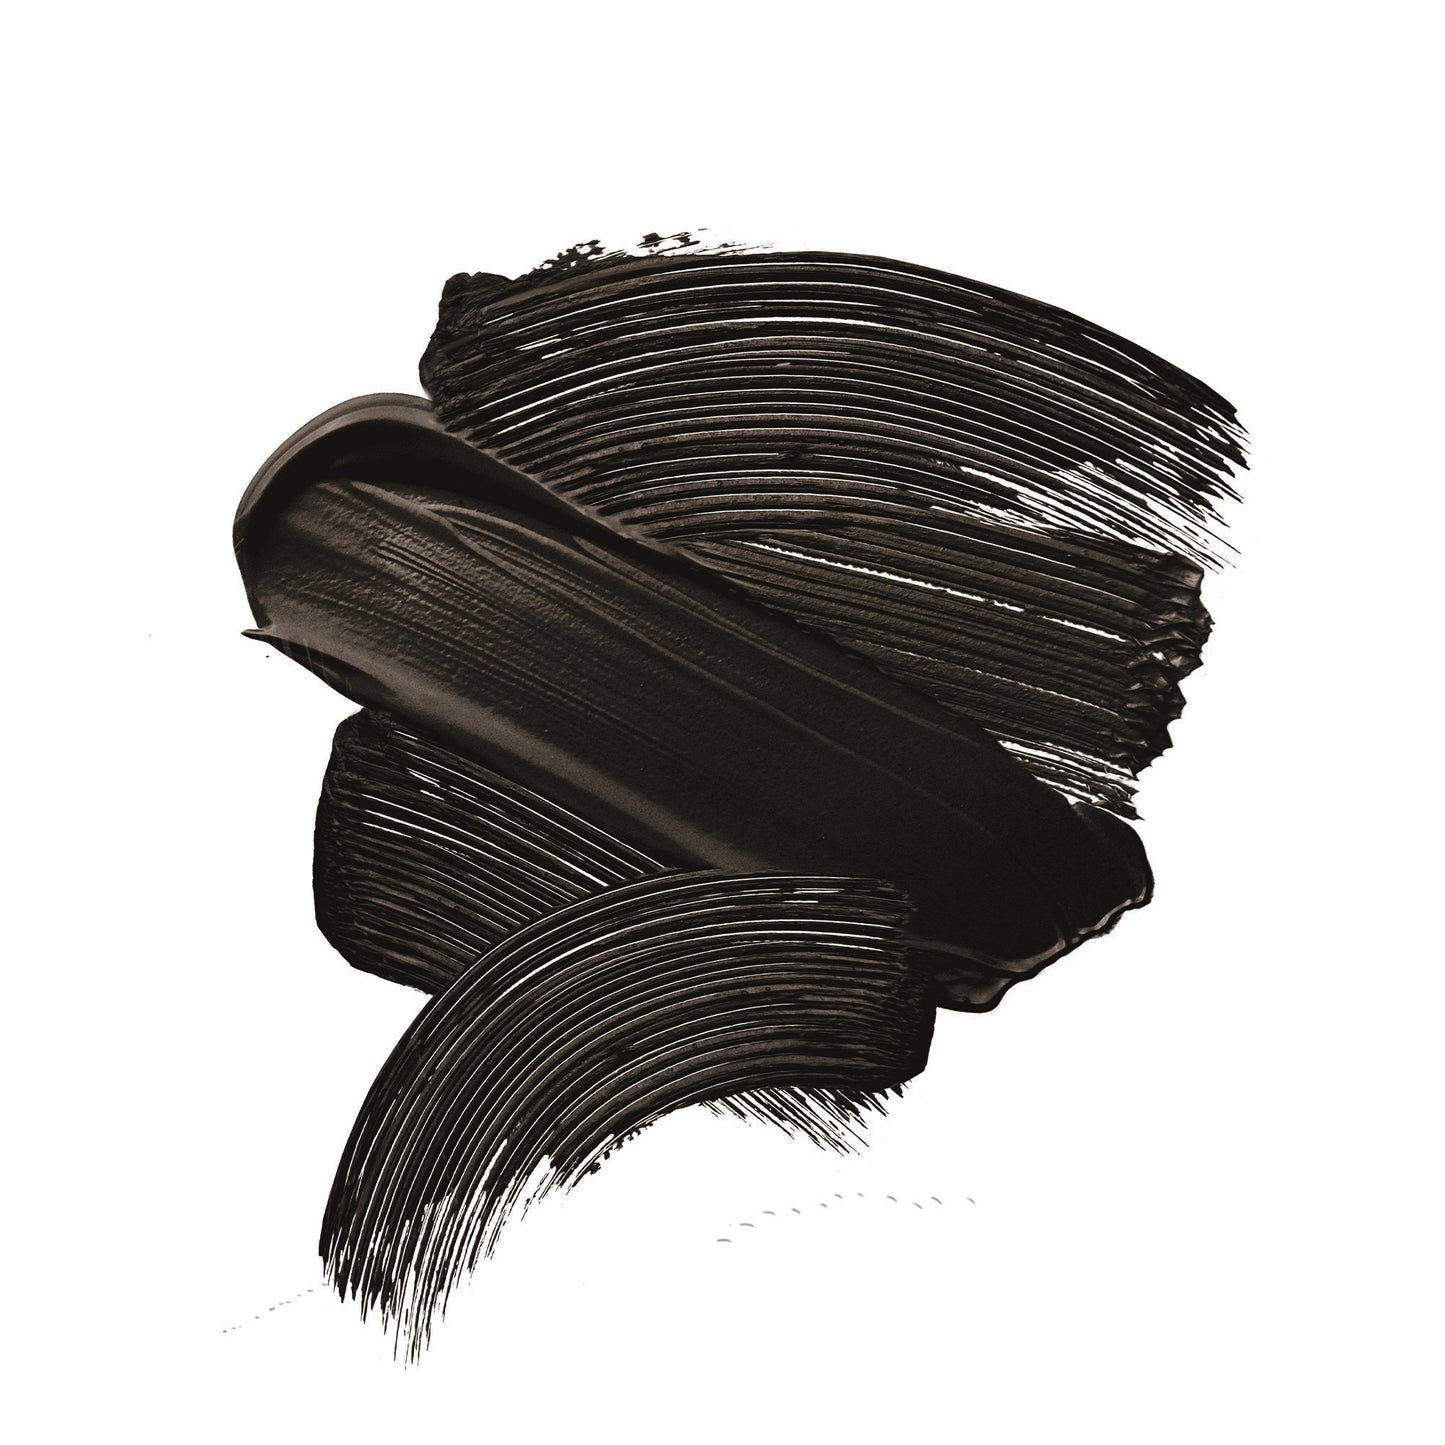 Swatch of Tinted Multi-Peptide Brow Gel - Color-Dark Brown against a white background